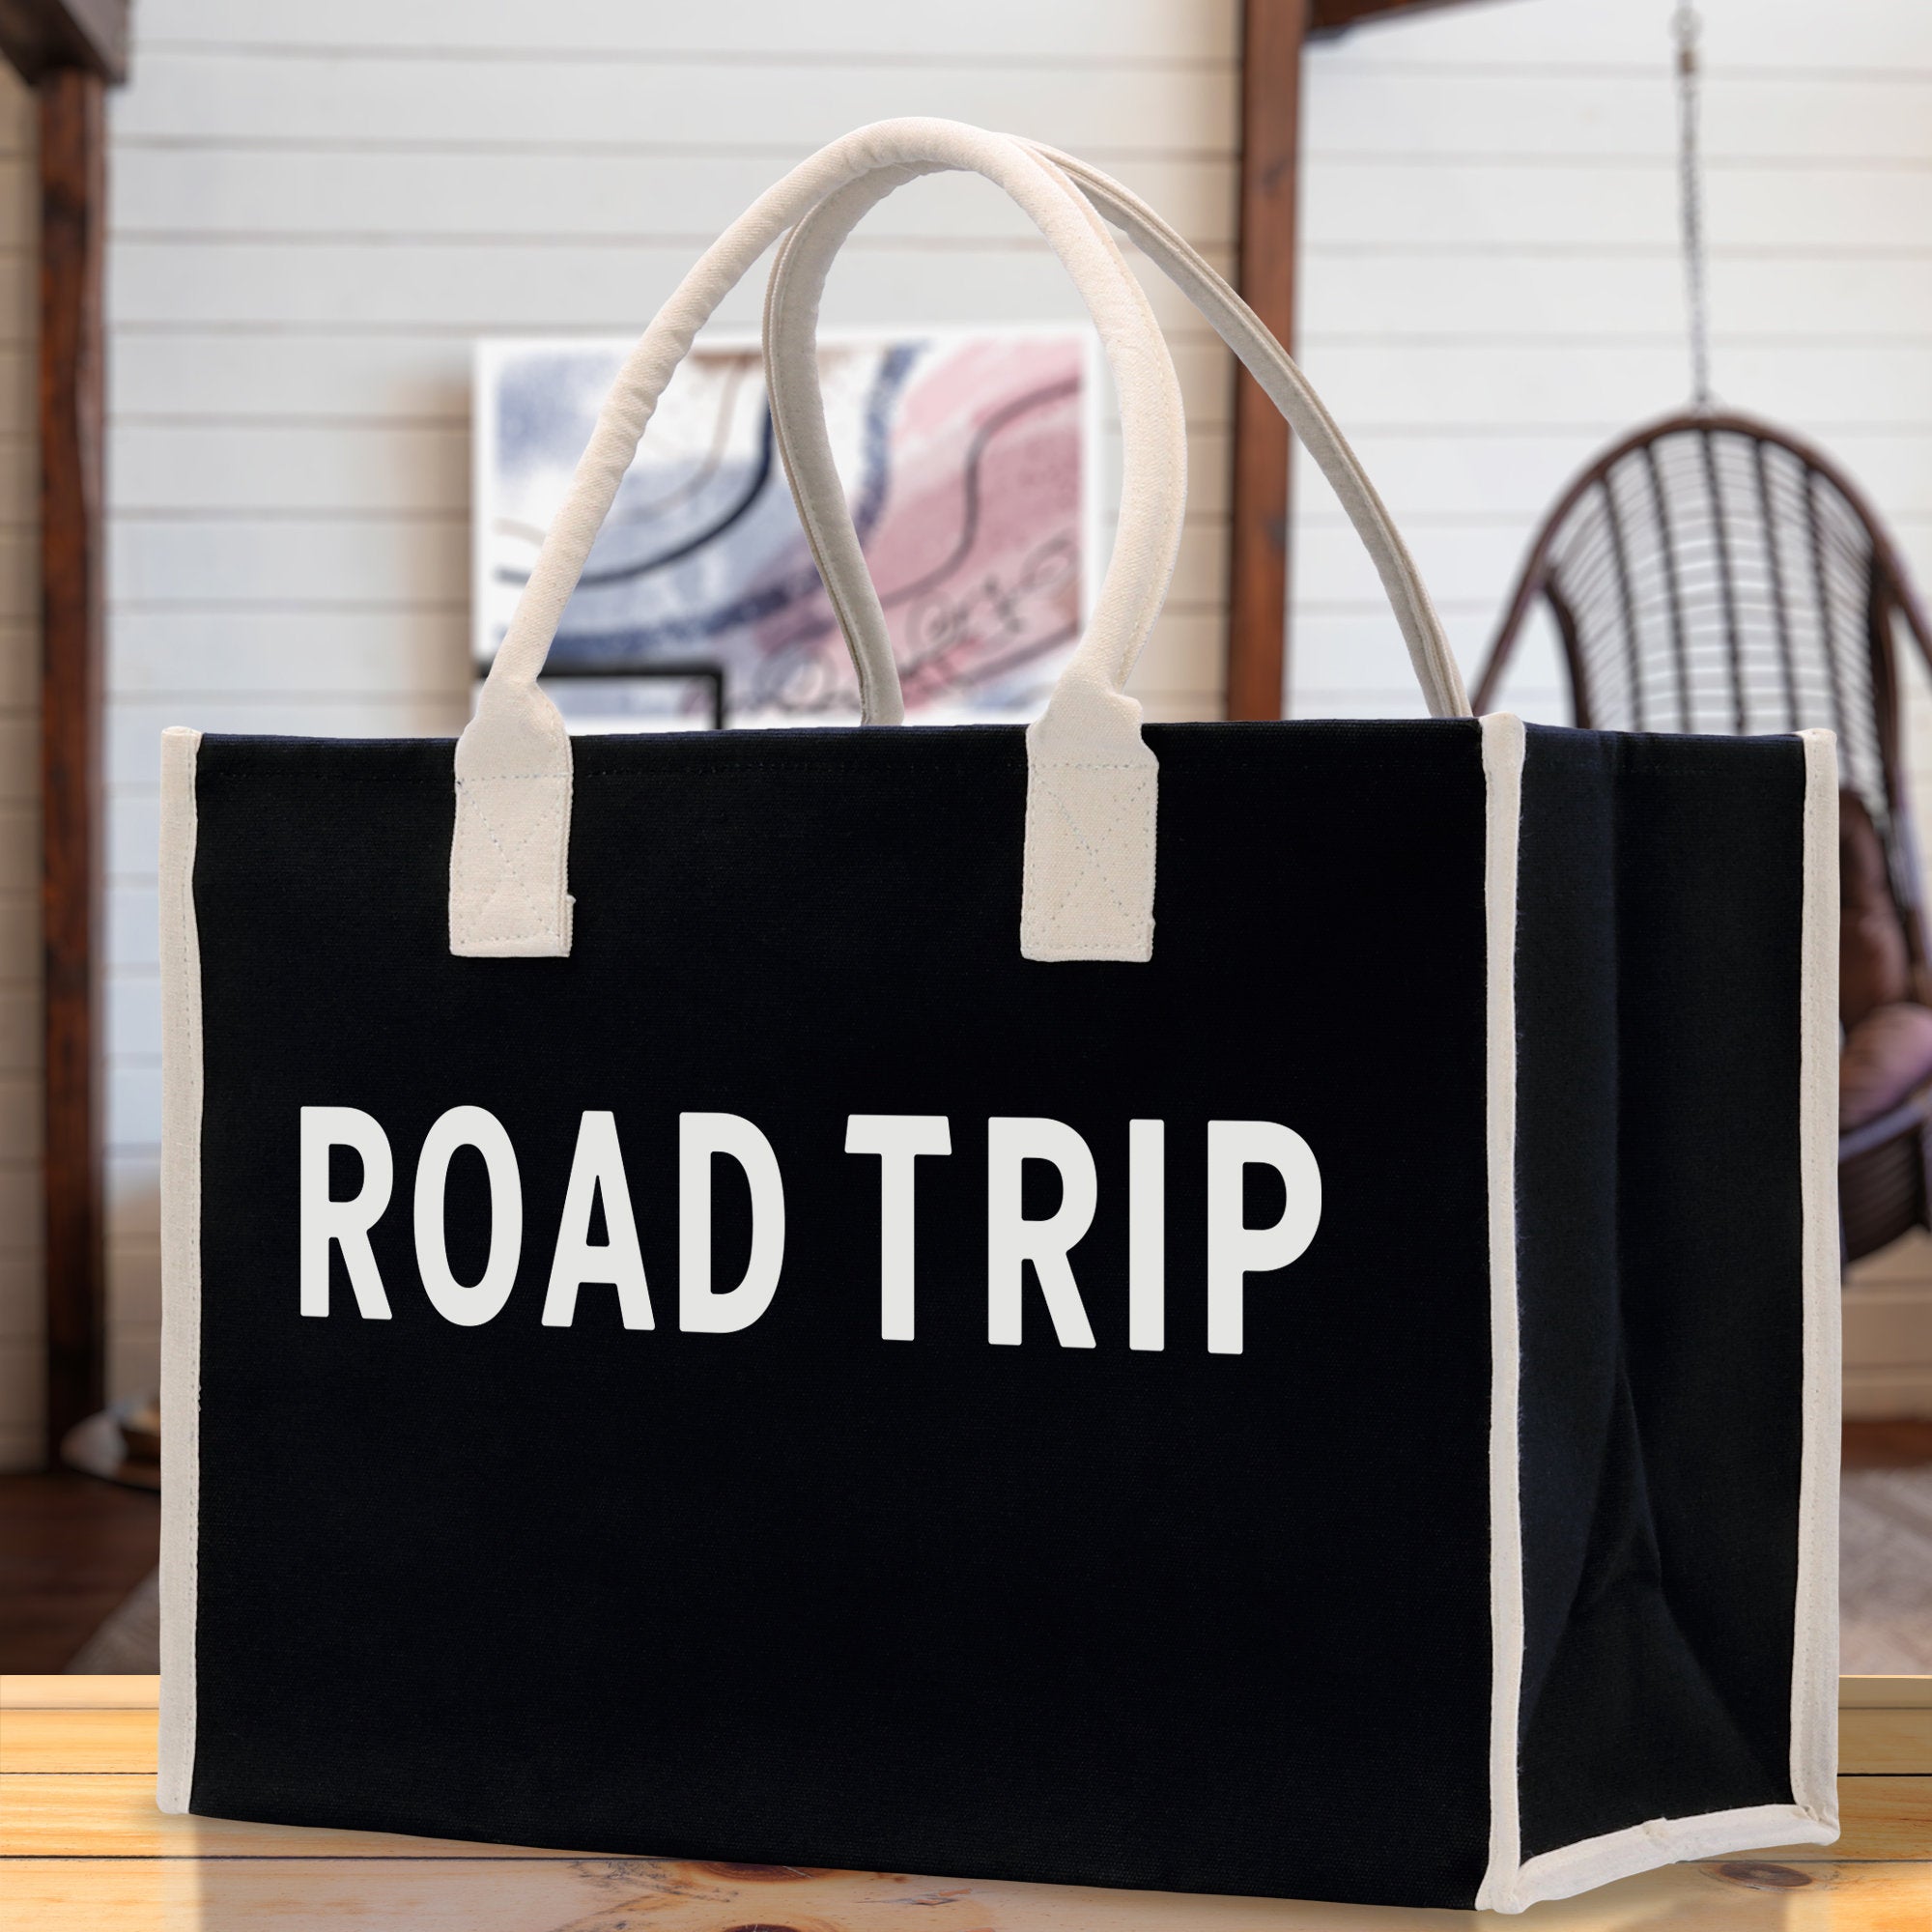 Road Trip Cotton Canvas Chic Beach Tote Bag Multipurpose Tote Weekender Tote Gift for Her Outdoor Tote Vacation Tote Large Beach Bag